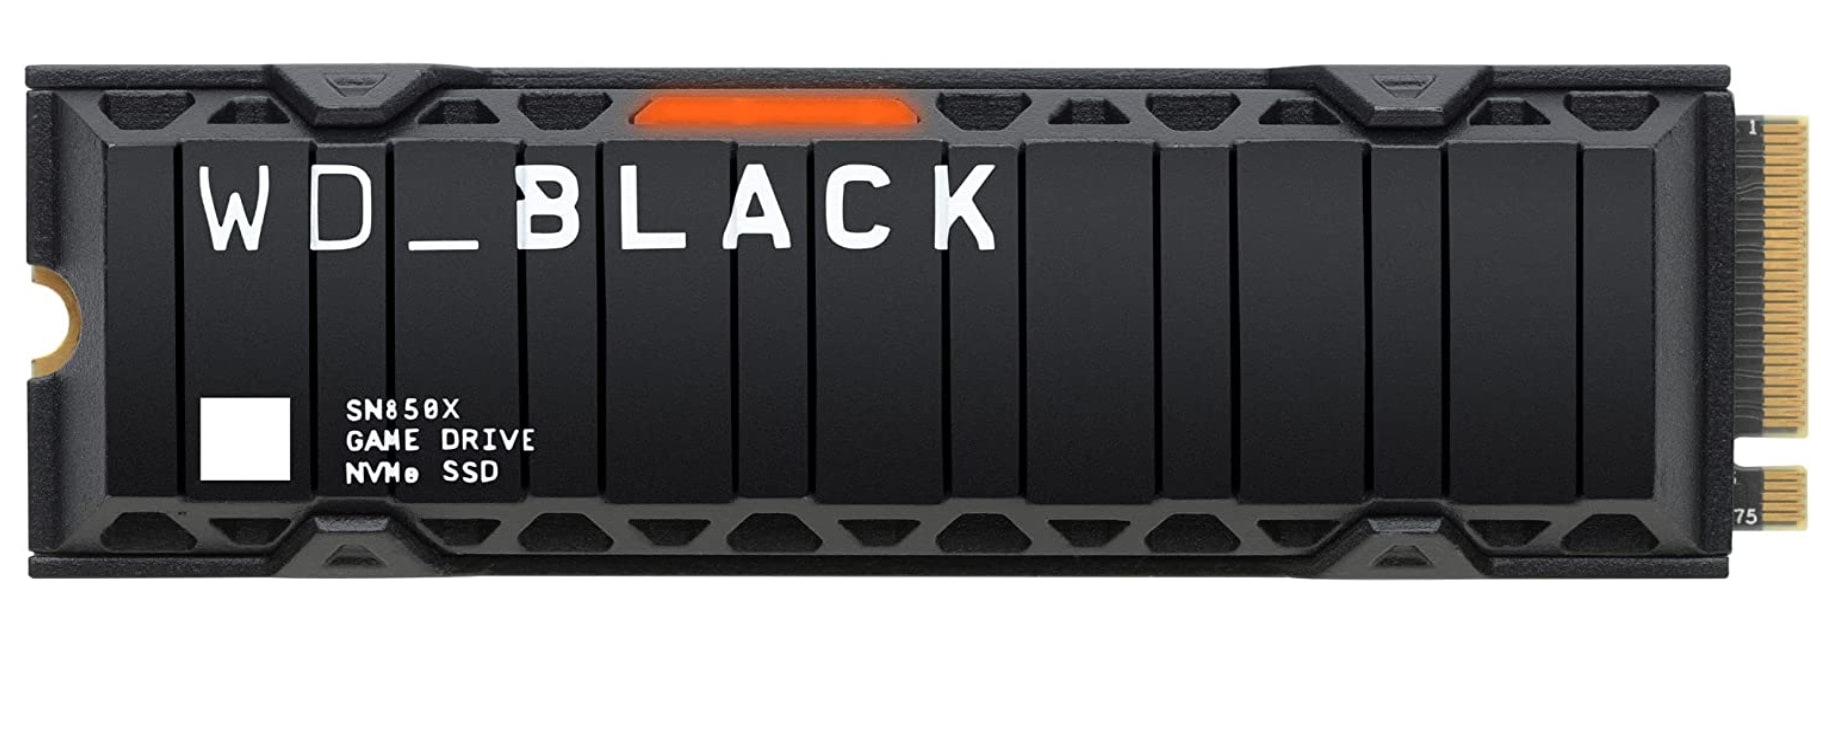 WD_Black interne Gaming-SSD »SN850X NVMe with Heatsink«, Anschluss M.2 PCIe 4.0, PCI Express 4.0